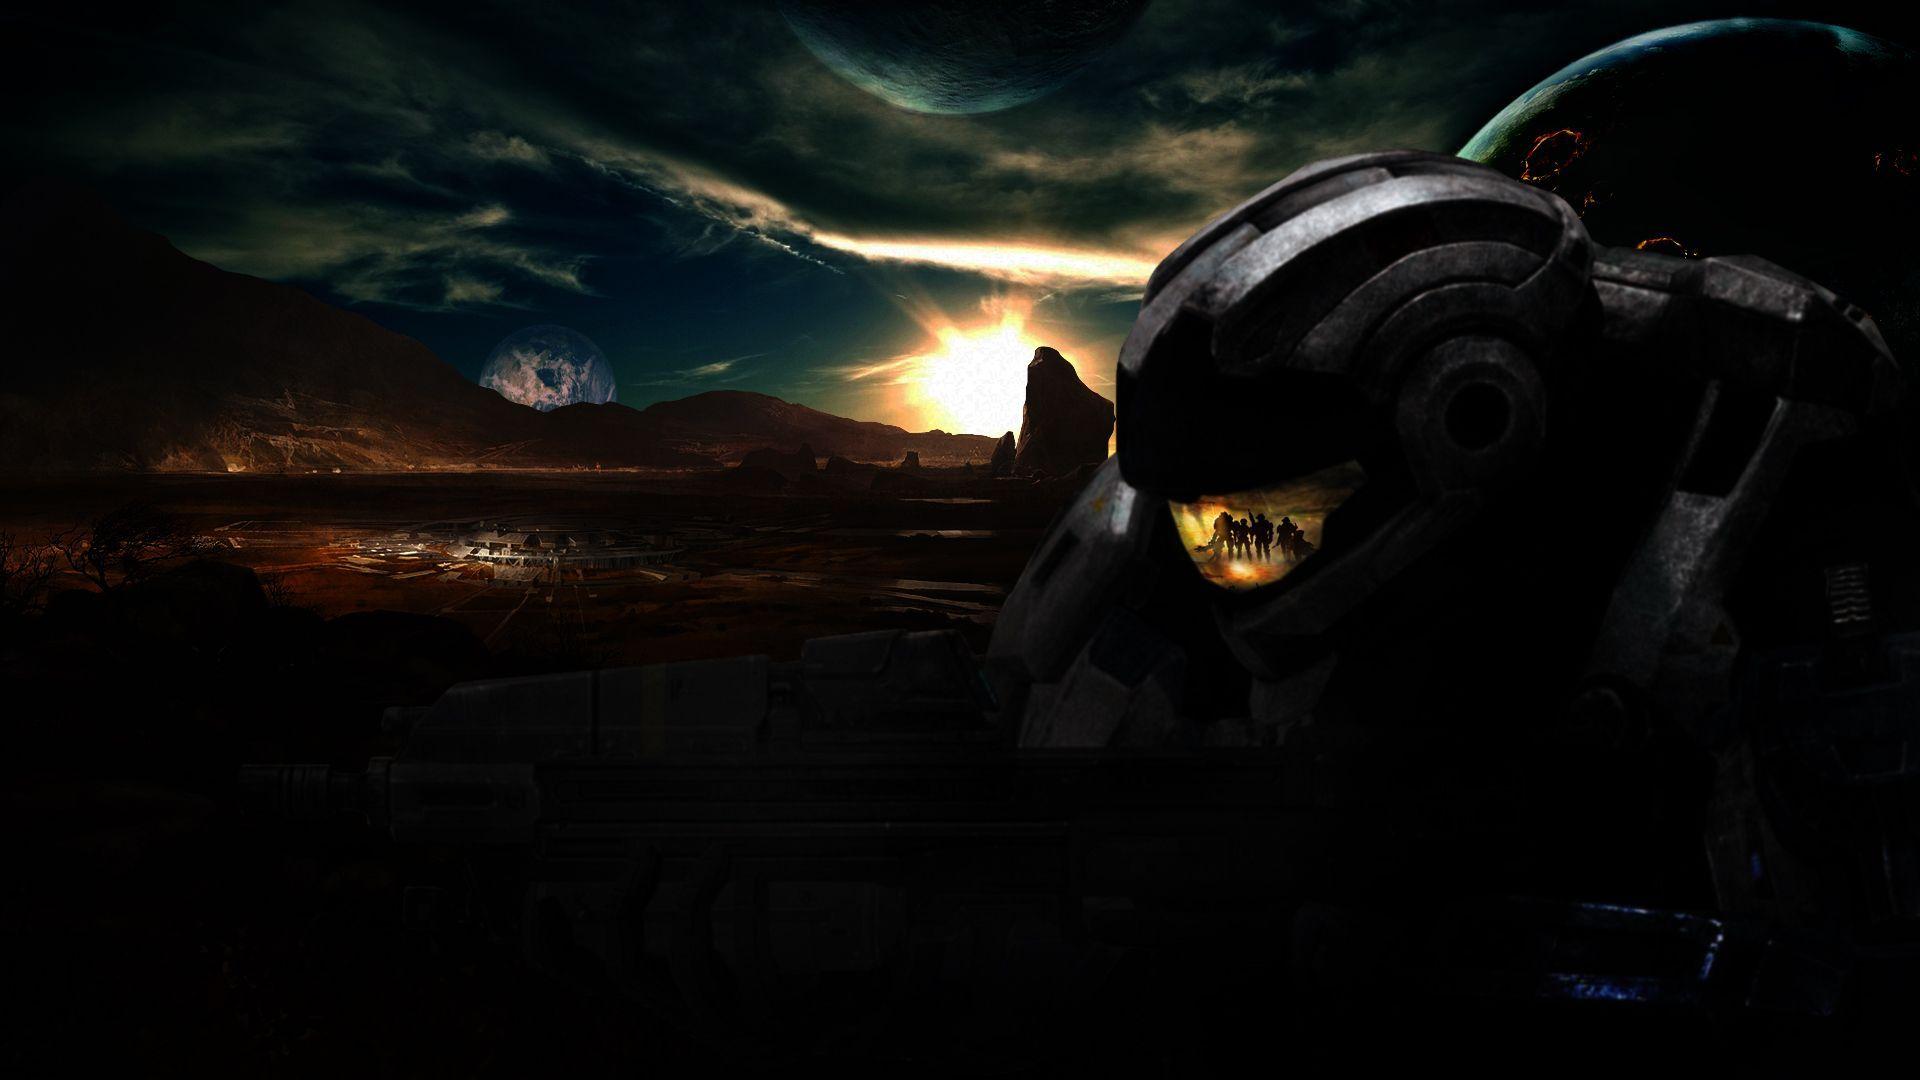 Download Cool Halo Wallpaper 8496 1920x1080 px High Resolution